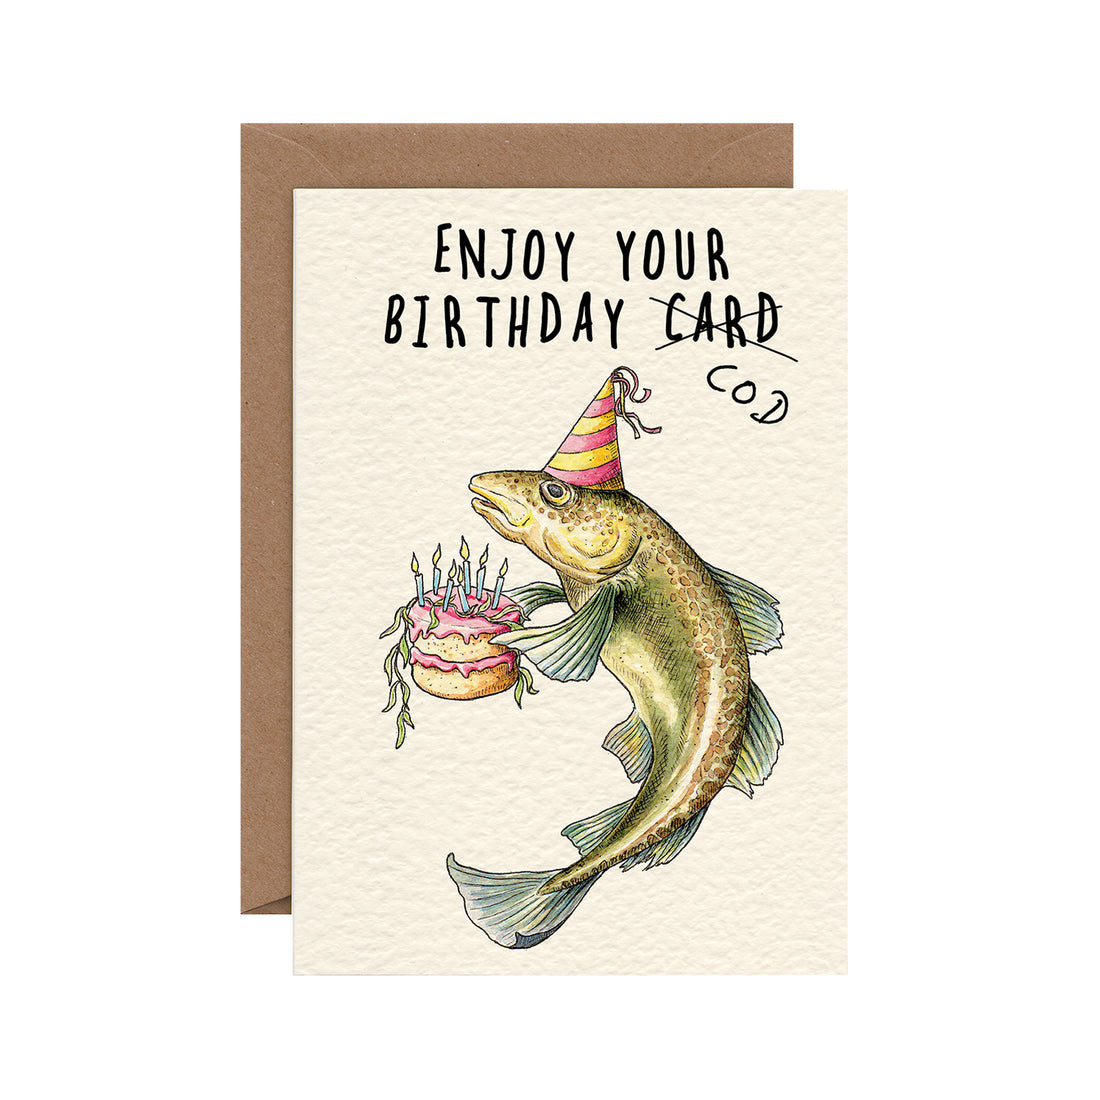 A Enjoy Your Birthday Cod Happy Birthday Card with an illustration of a fish wearing a party hat and holding a birthday cake.